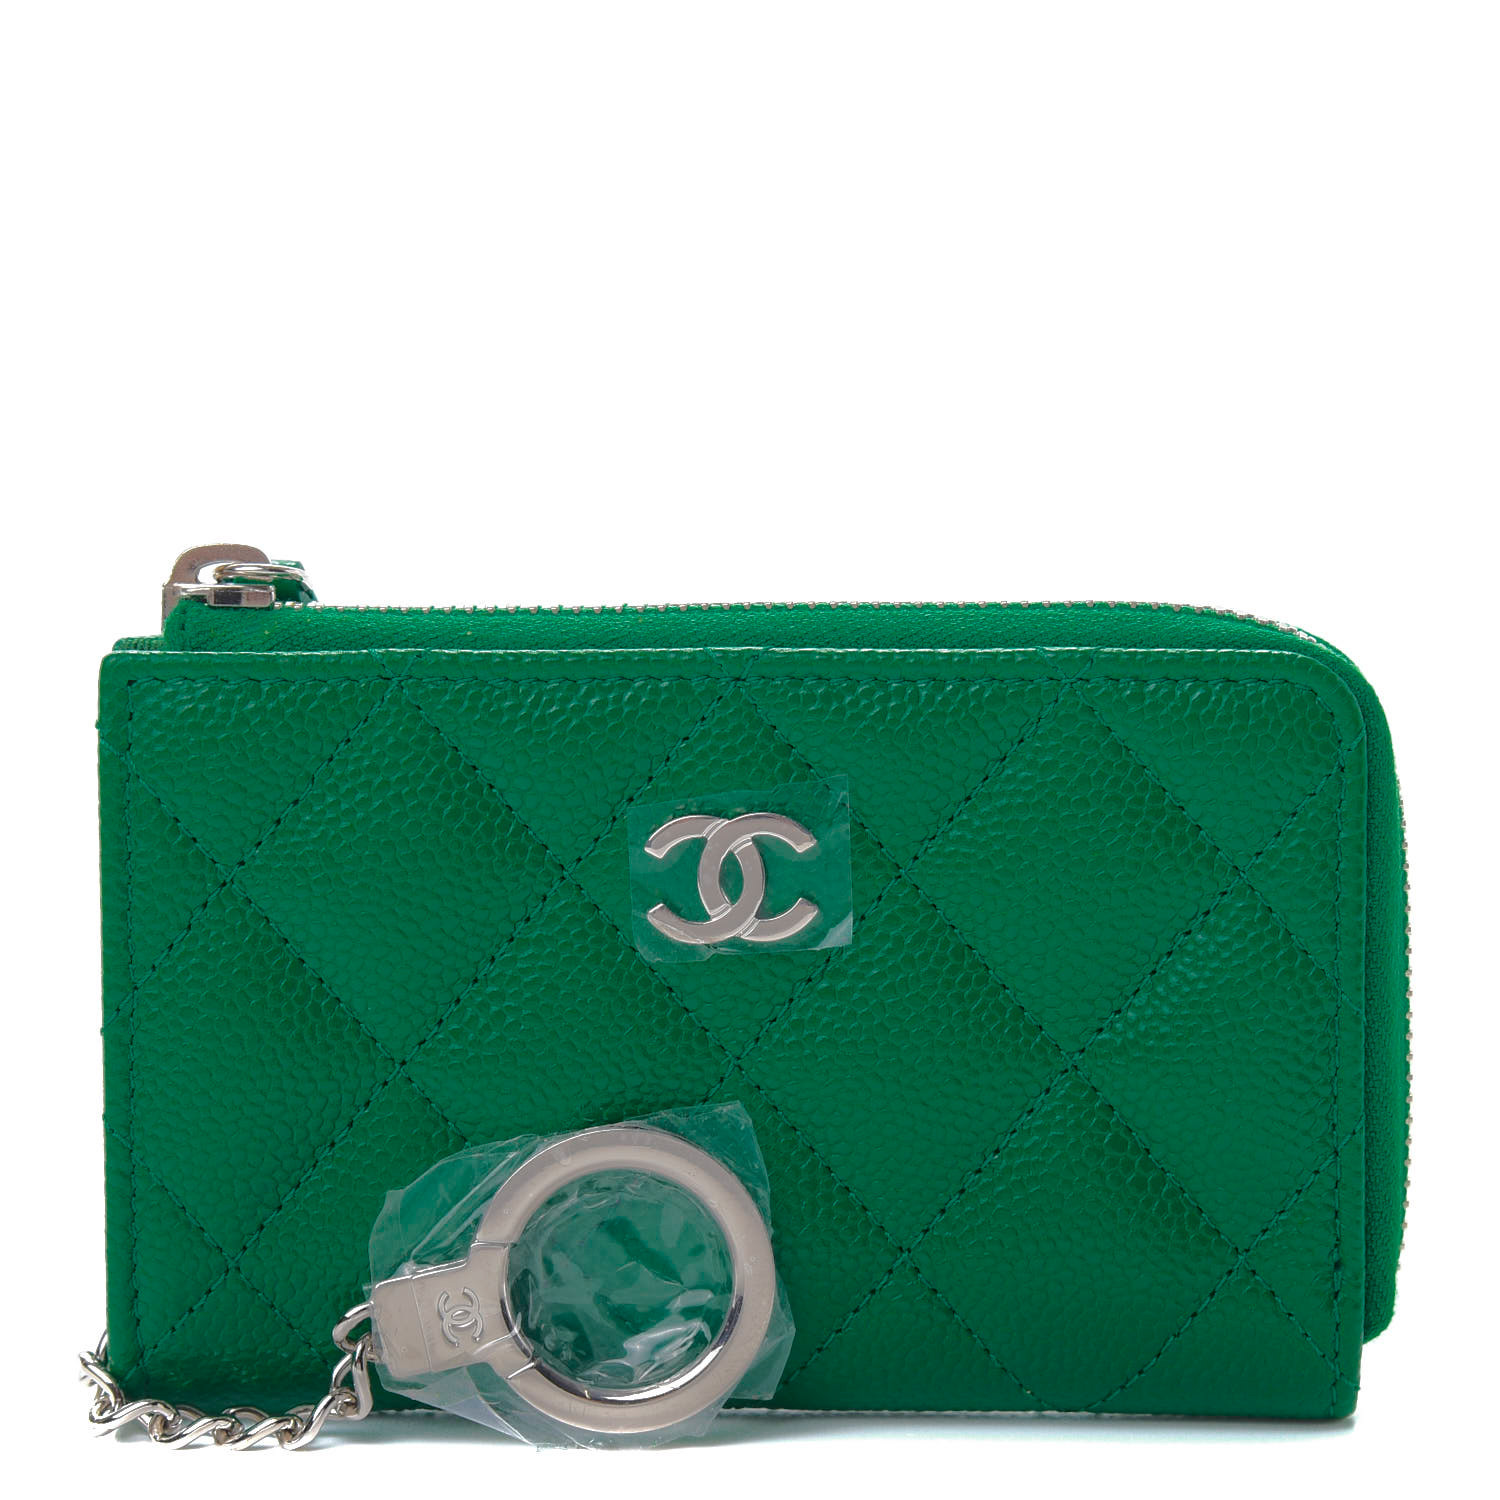 CHANEL Caviar Quilted Zipped Key Holder Case Green 696765 | FASHIONPHILE